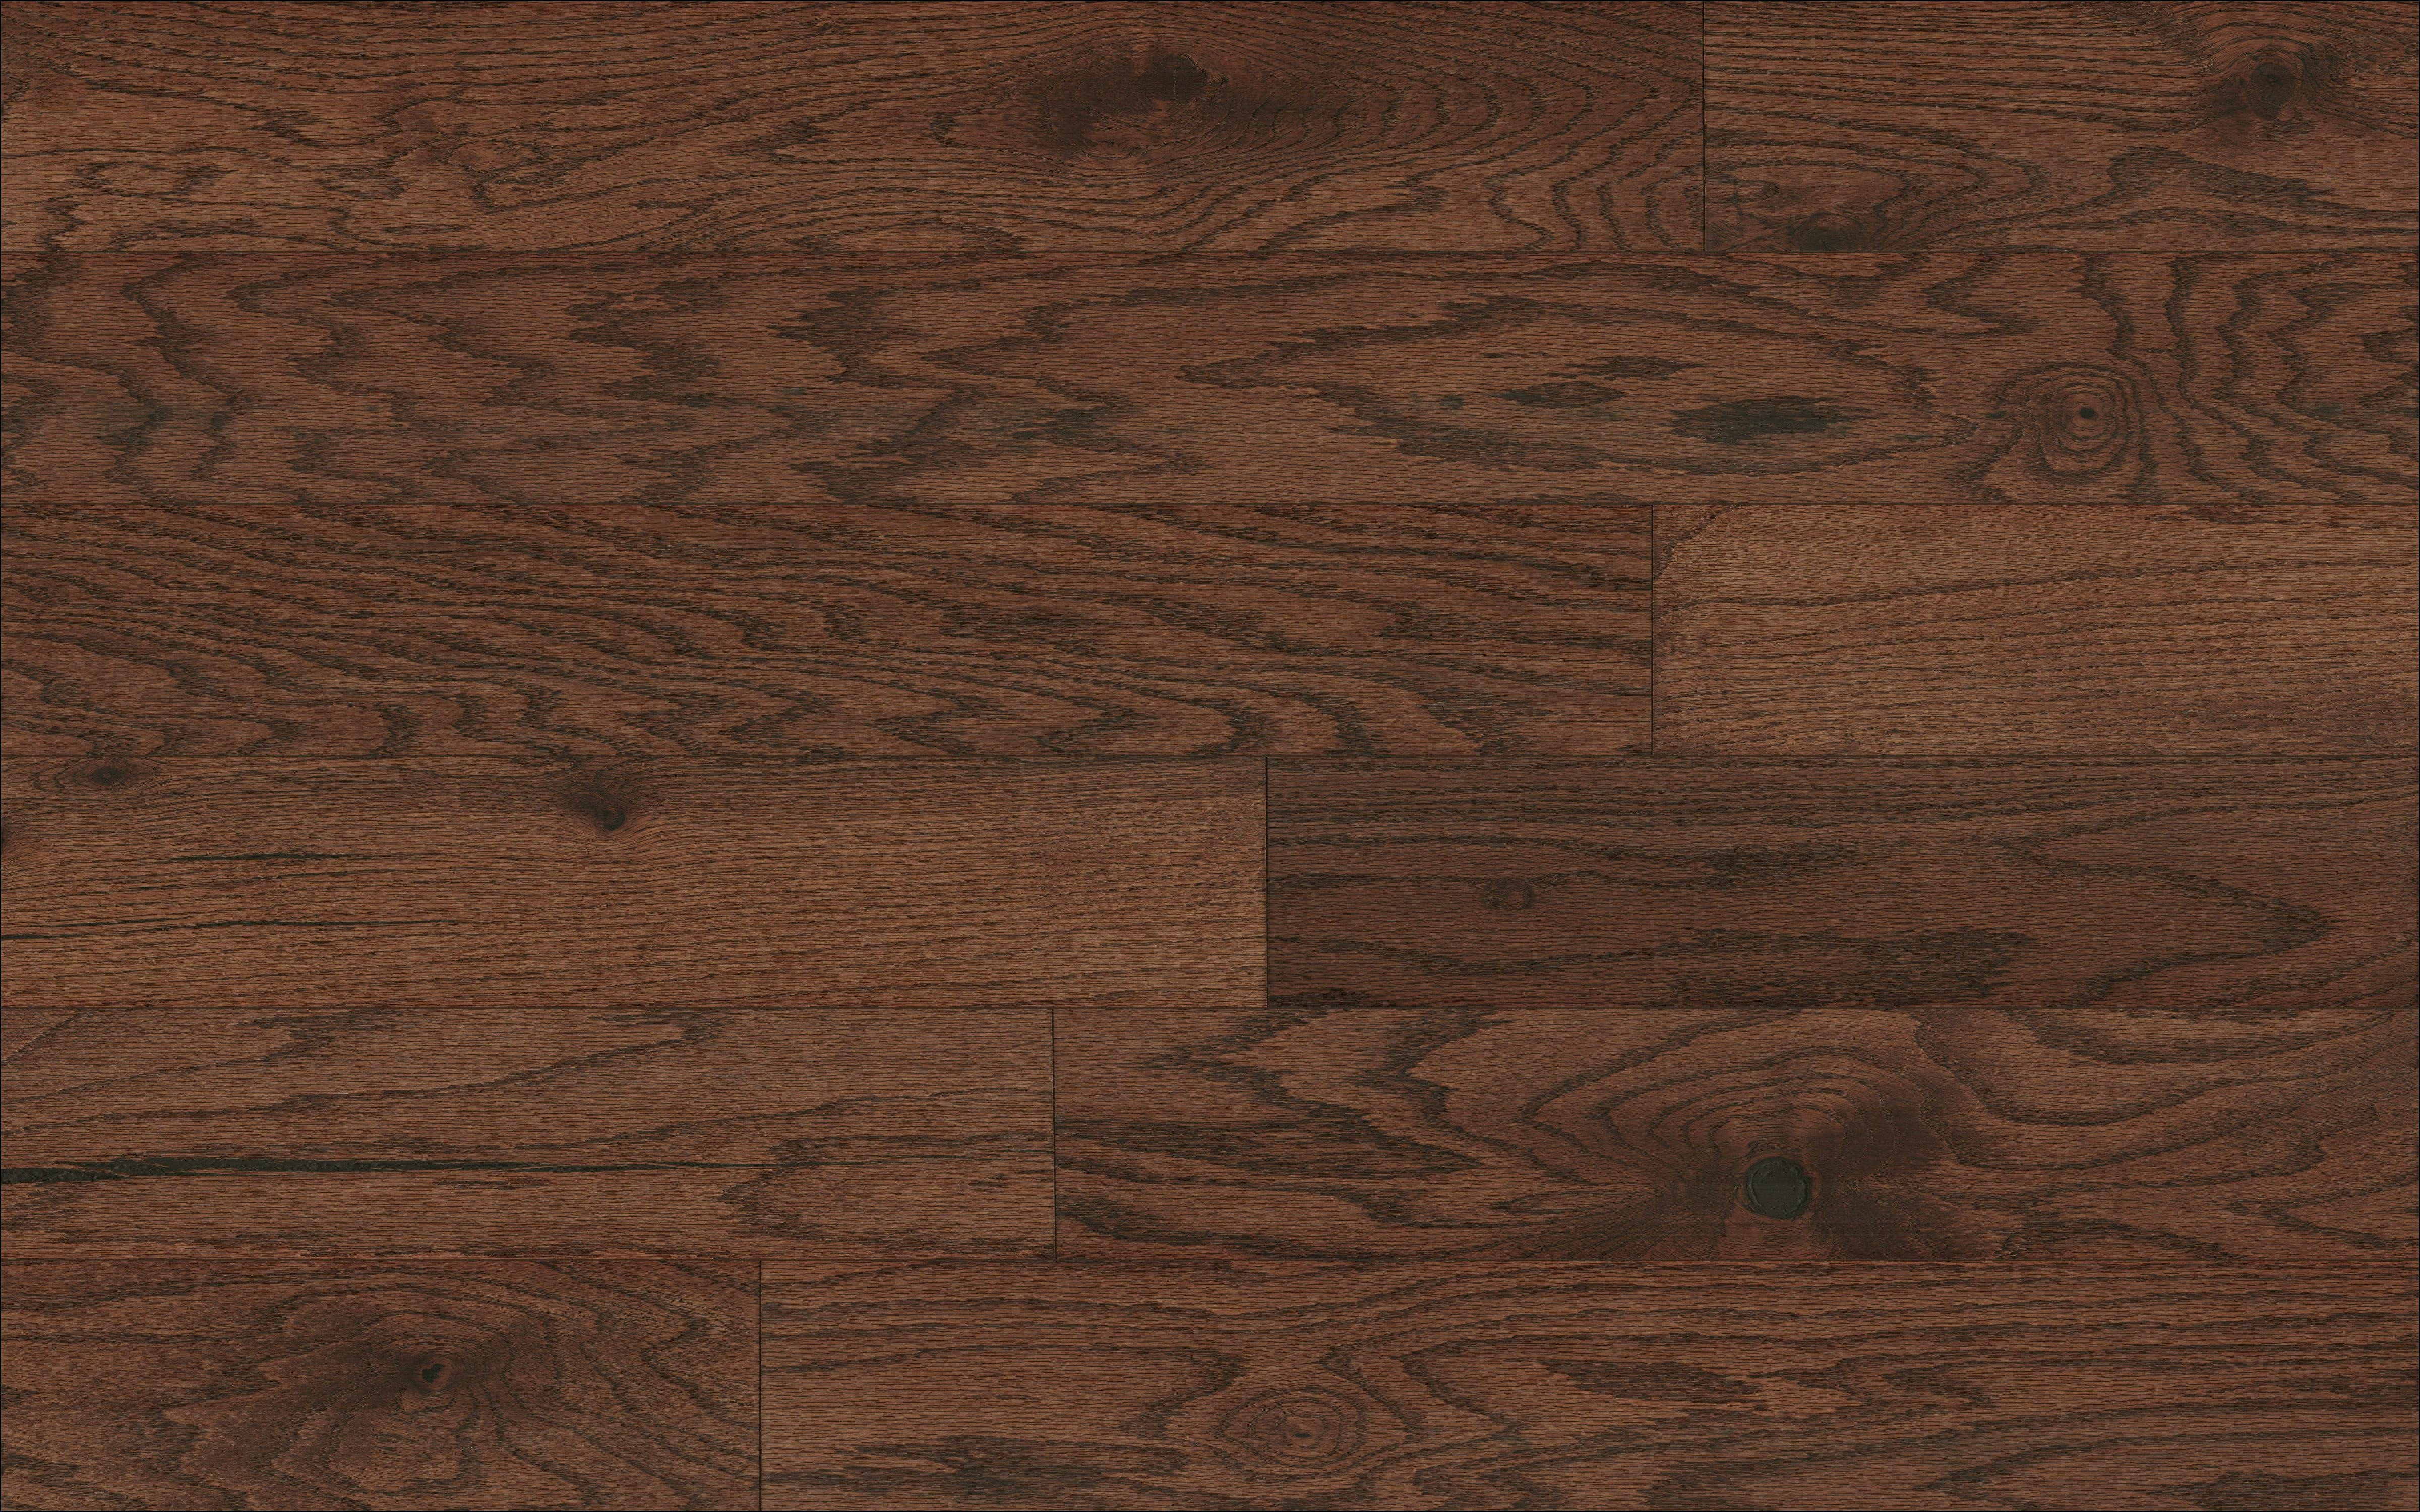 11 Perfect Oak or Maple Hardwood Floors which is Better 2024 free download oak or maple hardwood floors which is better of best place flooring ideas regarding best place to buy engineered hardwood flooring collection mullican devonshire oak saddle 5 engineered hard